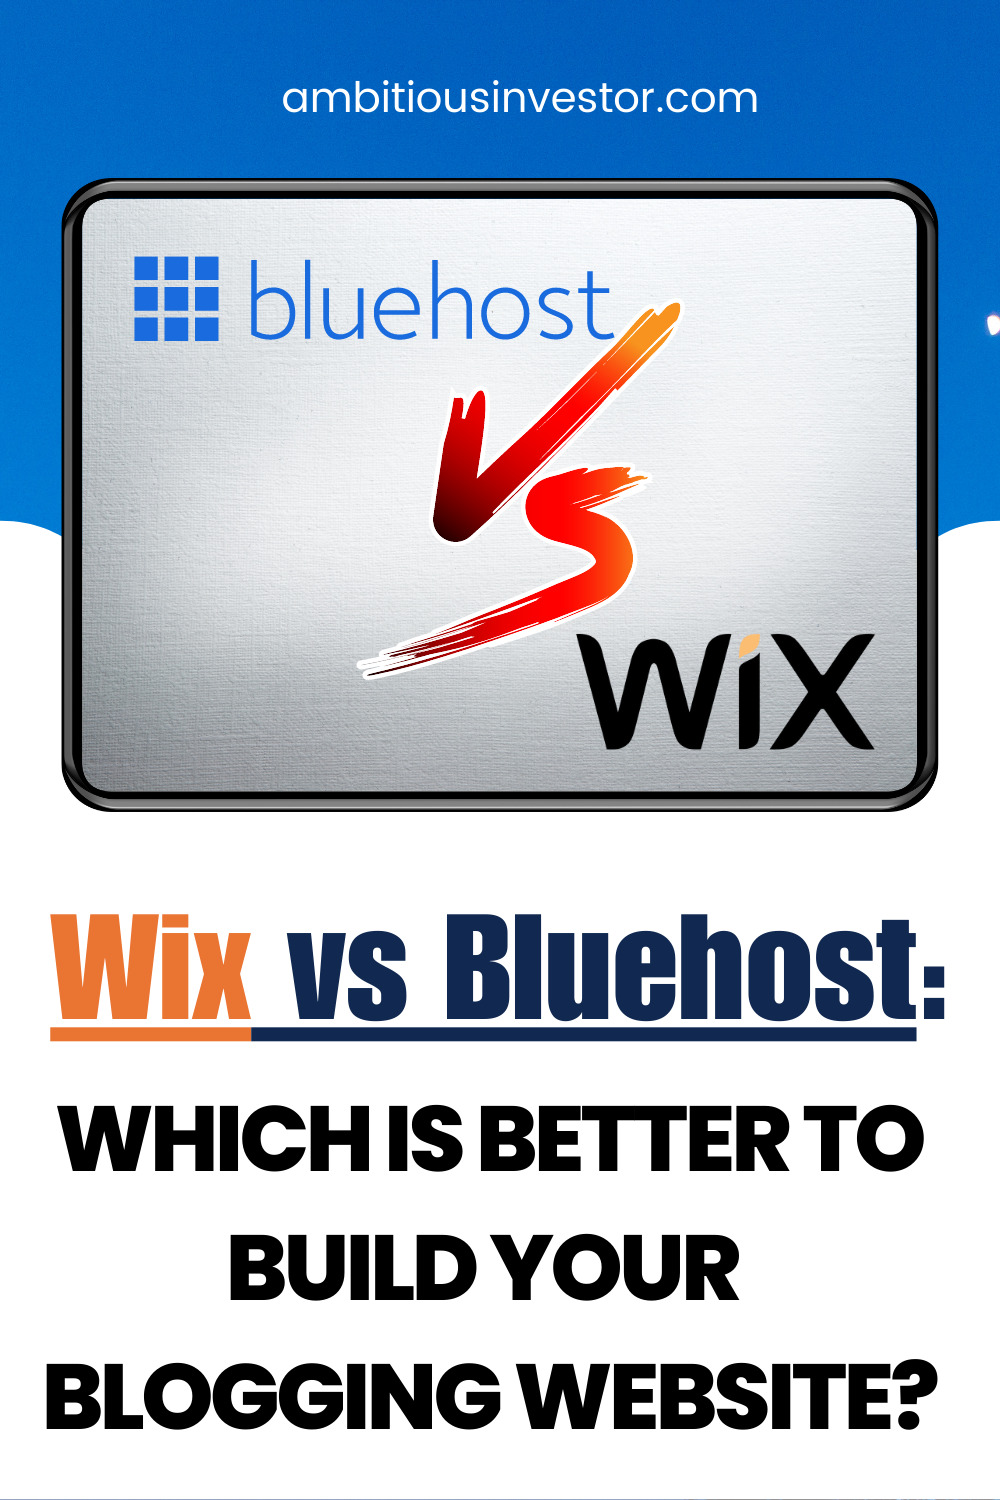 Wix vs. Bluehost – Which is Better to Build Your Blogging Website?